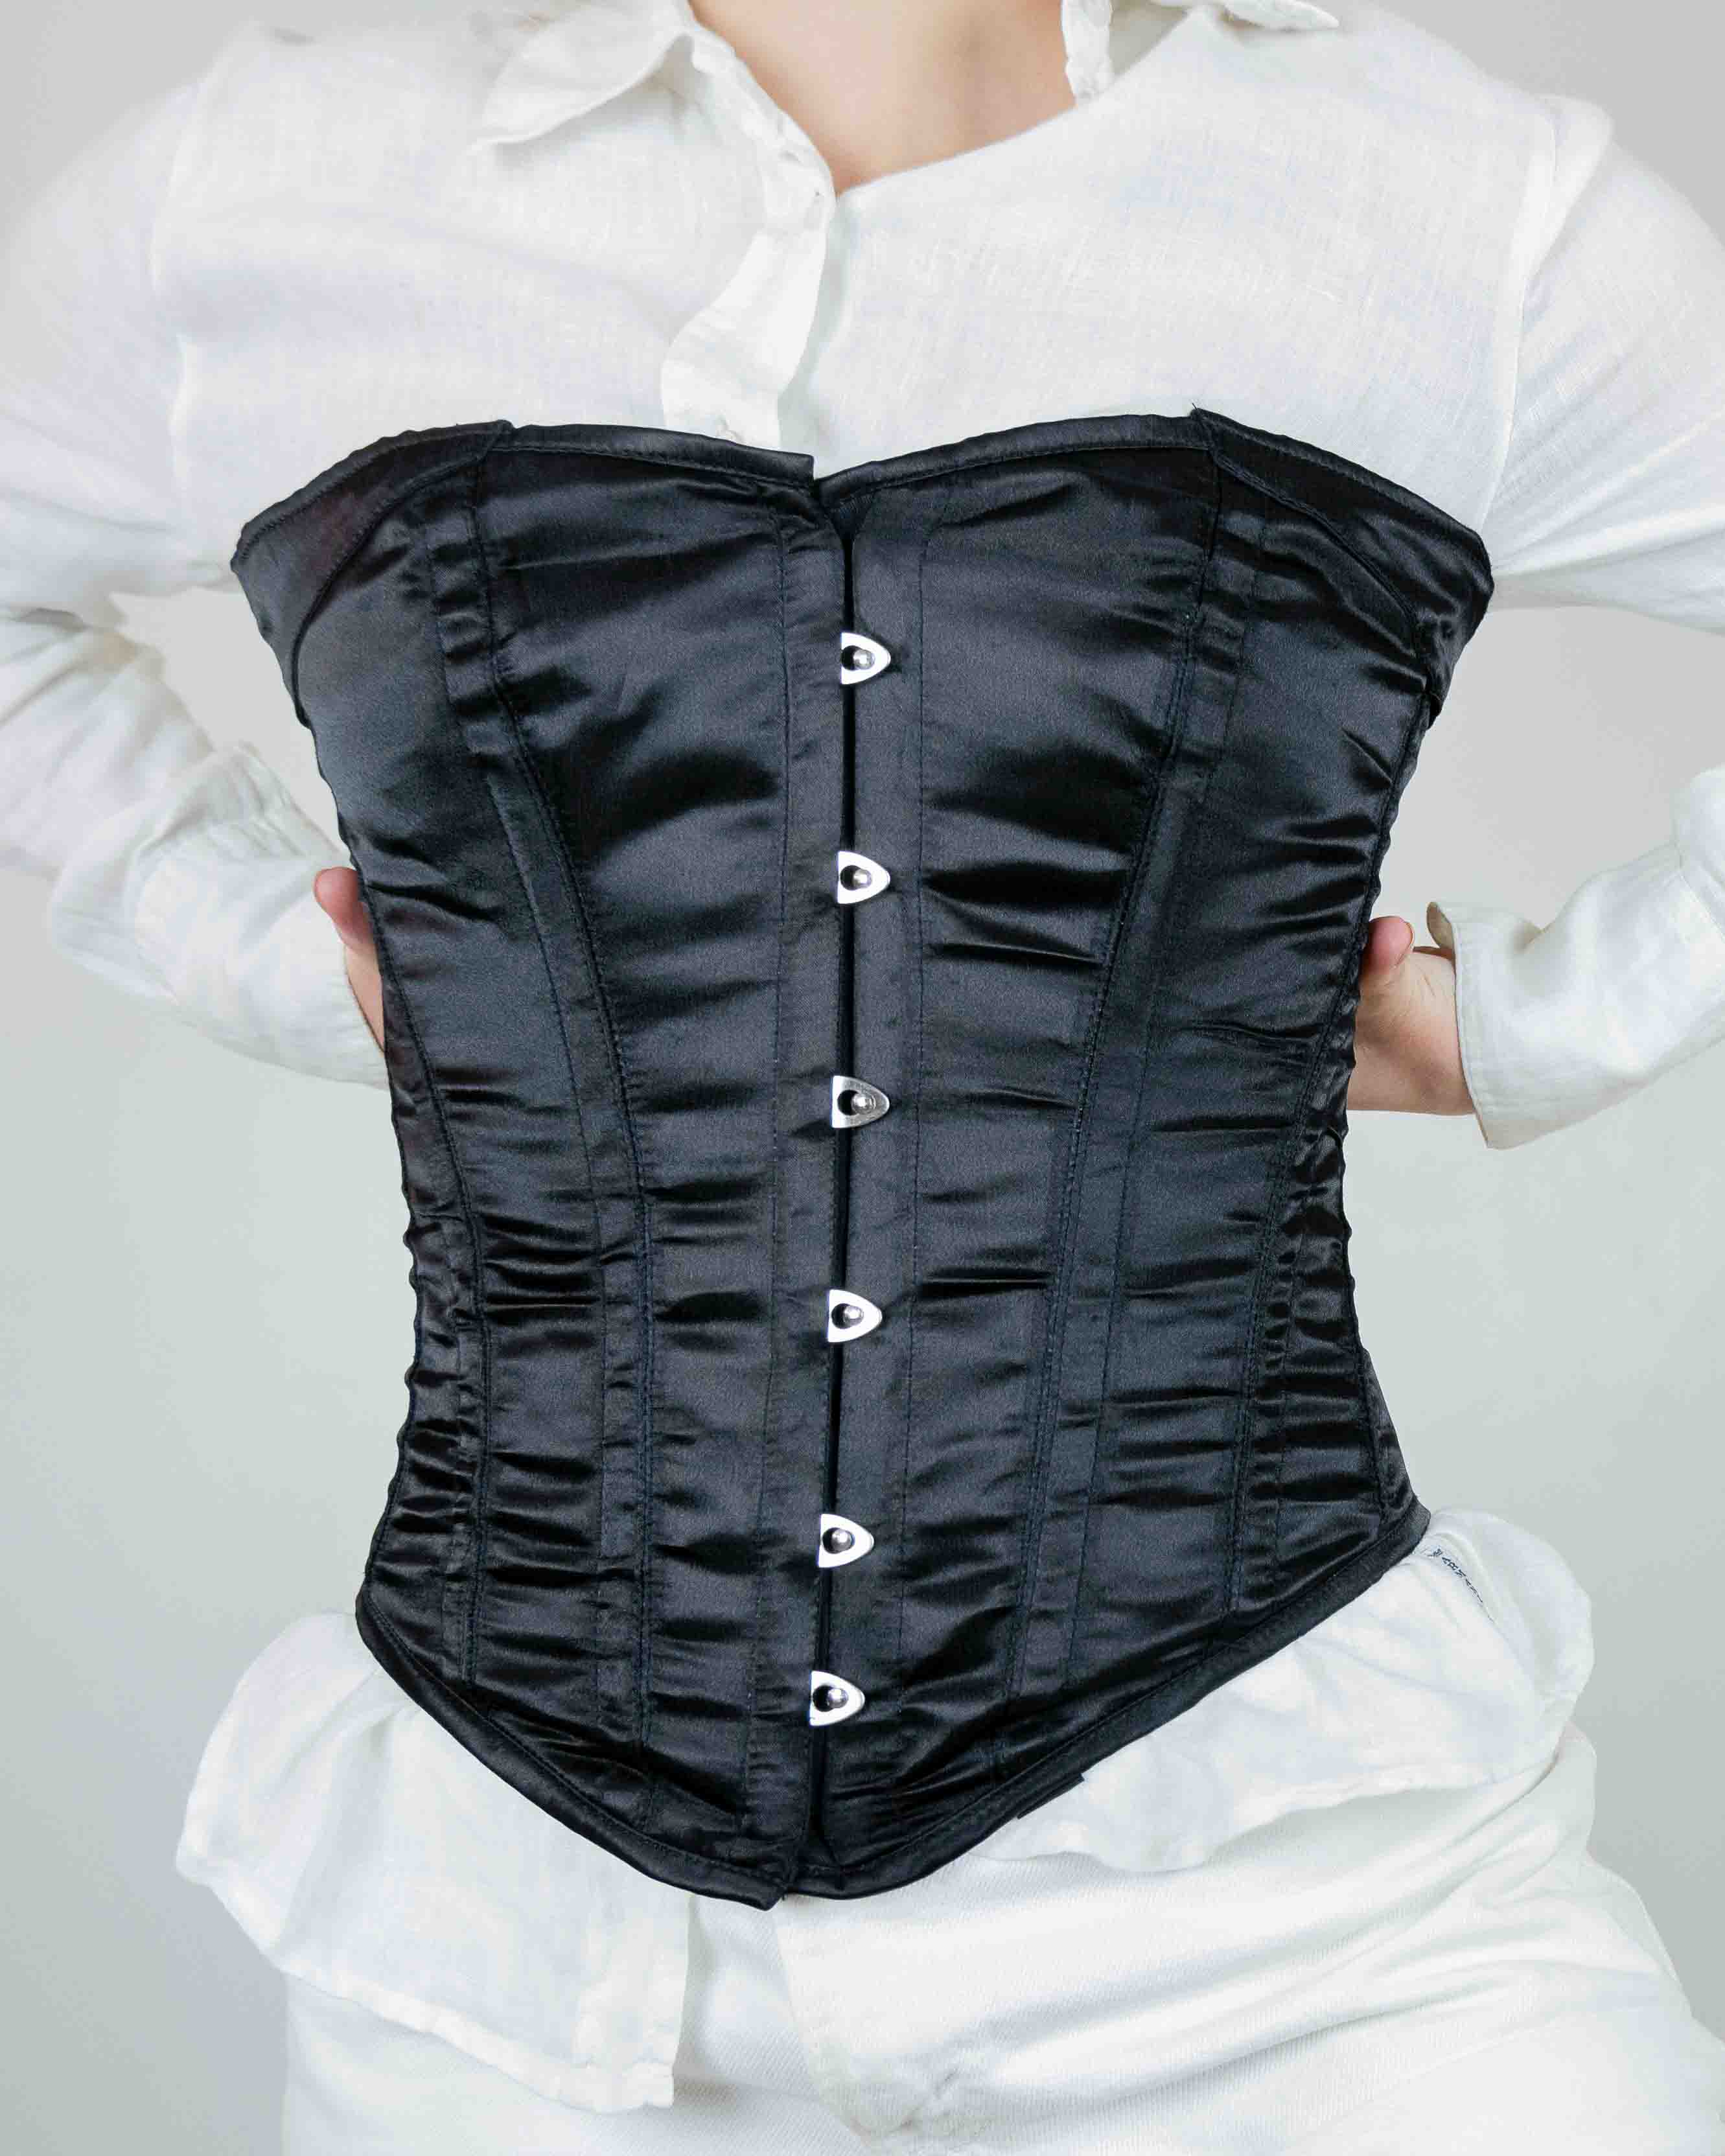 Vaacodor Black & White Victorian Patterned Corset